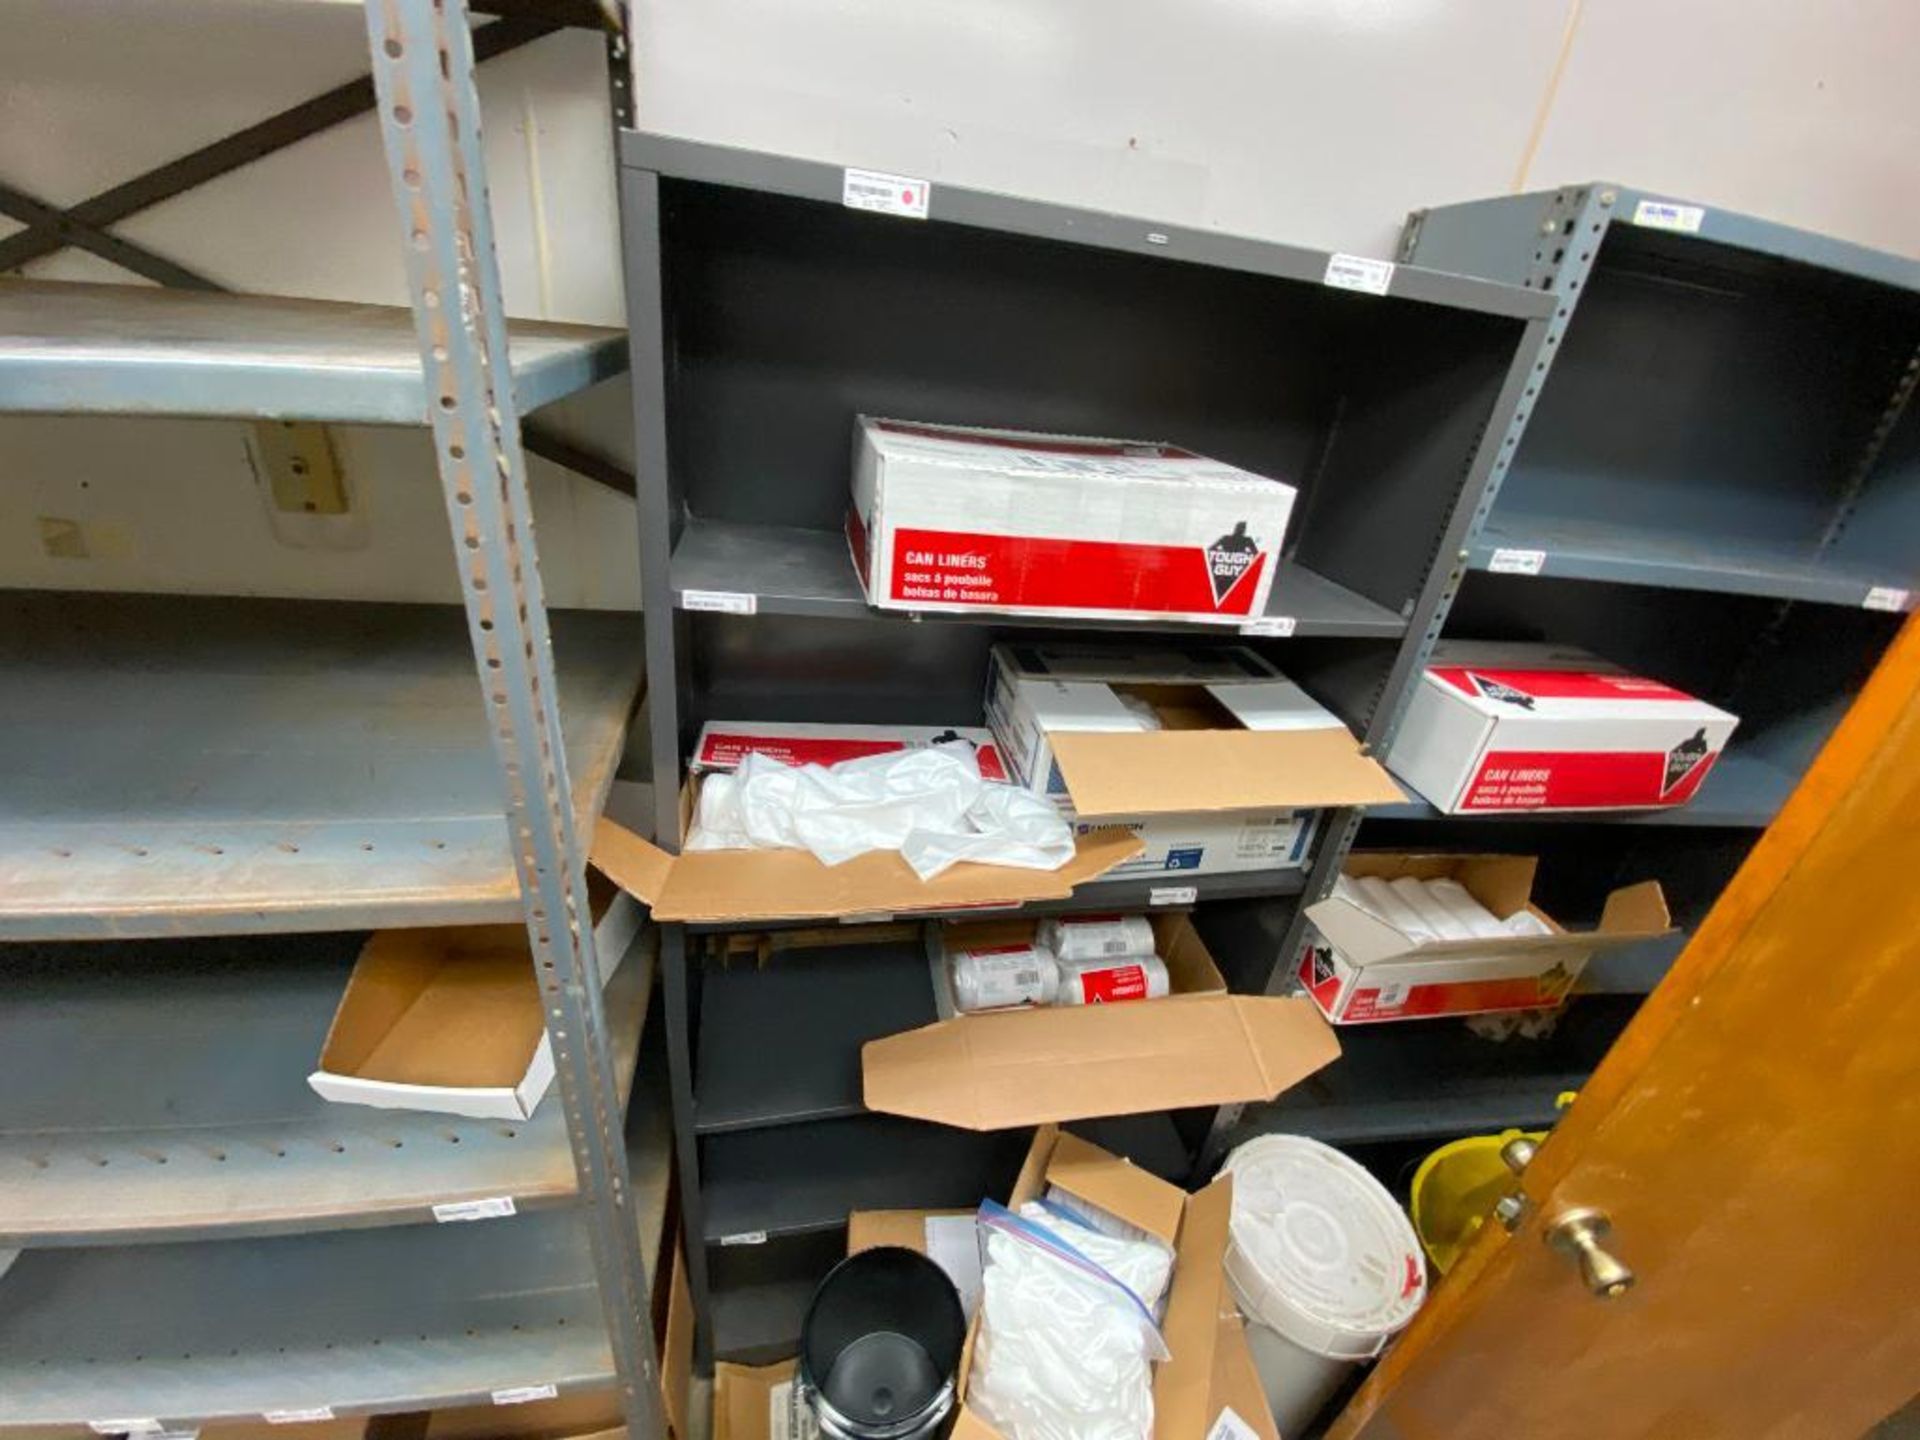 contents of supply room, JustRite flammable storage cabinets, SPX pump, assorted bits, Cryospray, in - Image 16 of 31